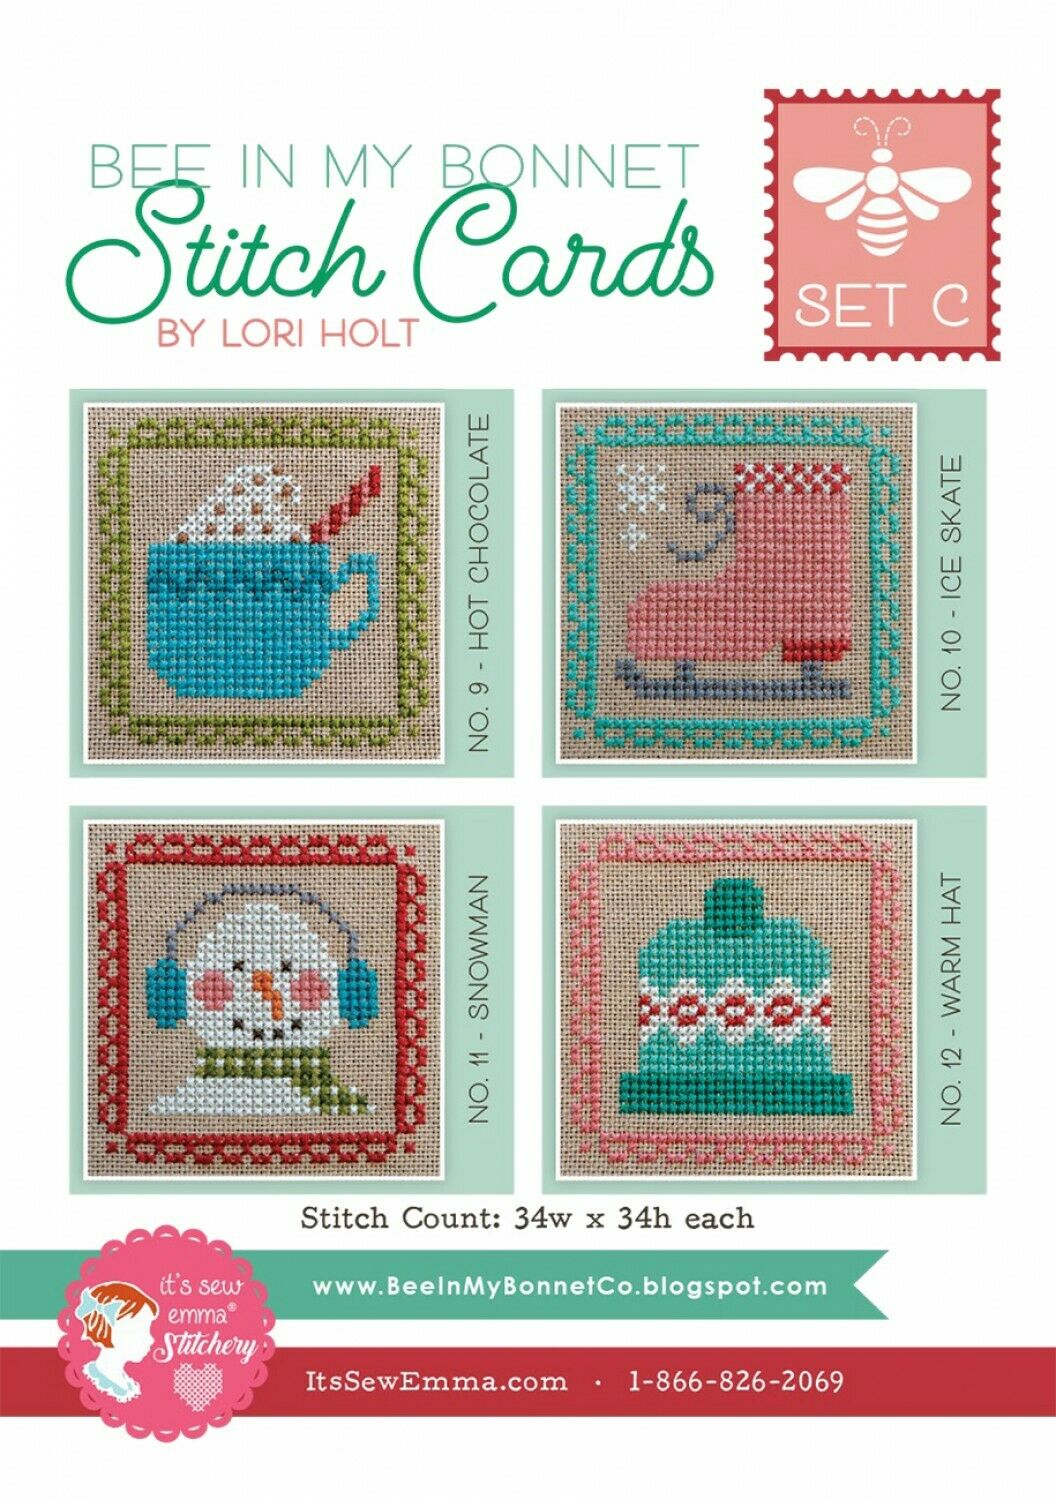 STITCH CARDS SET C by Lori Holt of Bee in my Bonnet Lori Holt